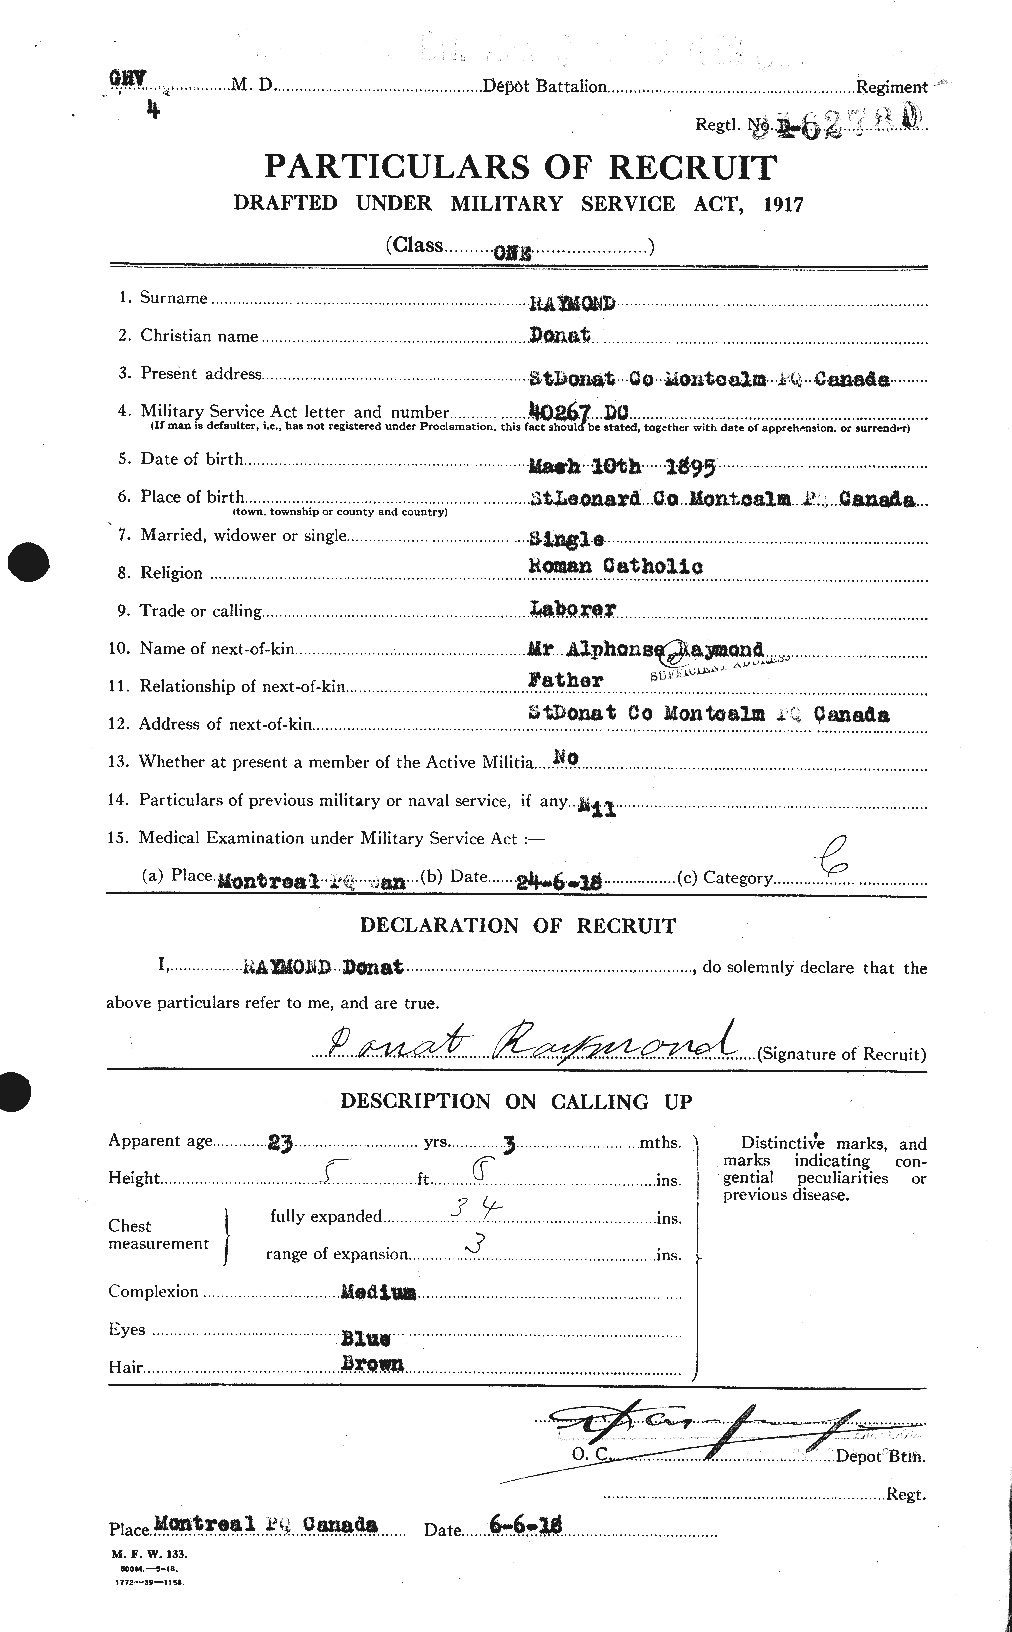 Personnel Records of the First World War - CEF 595297a